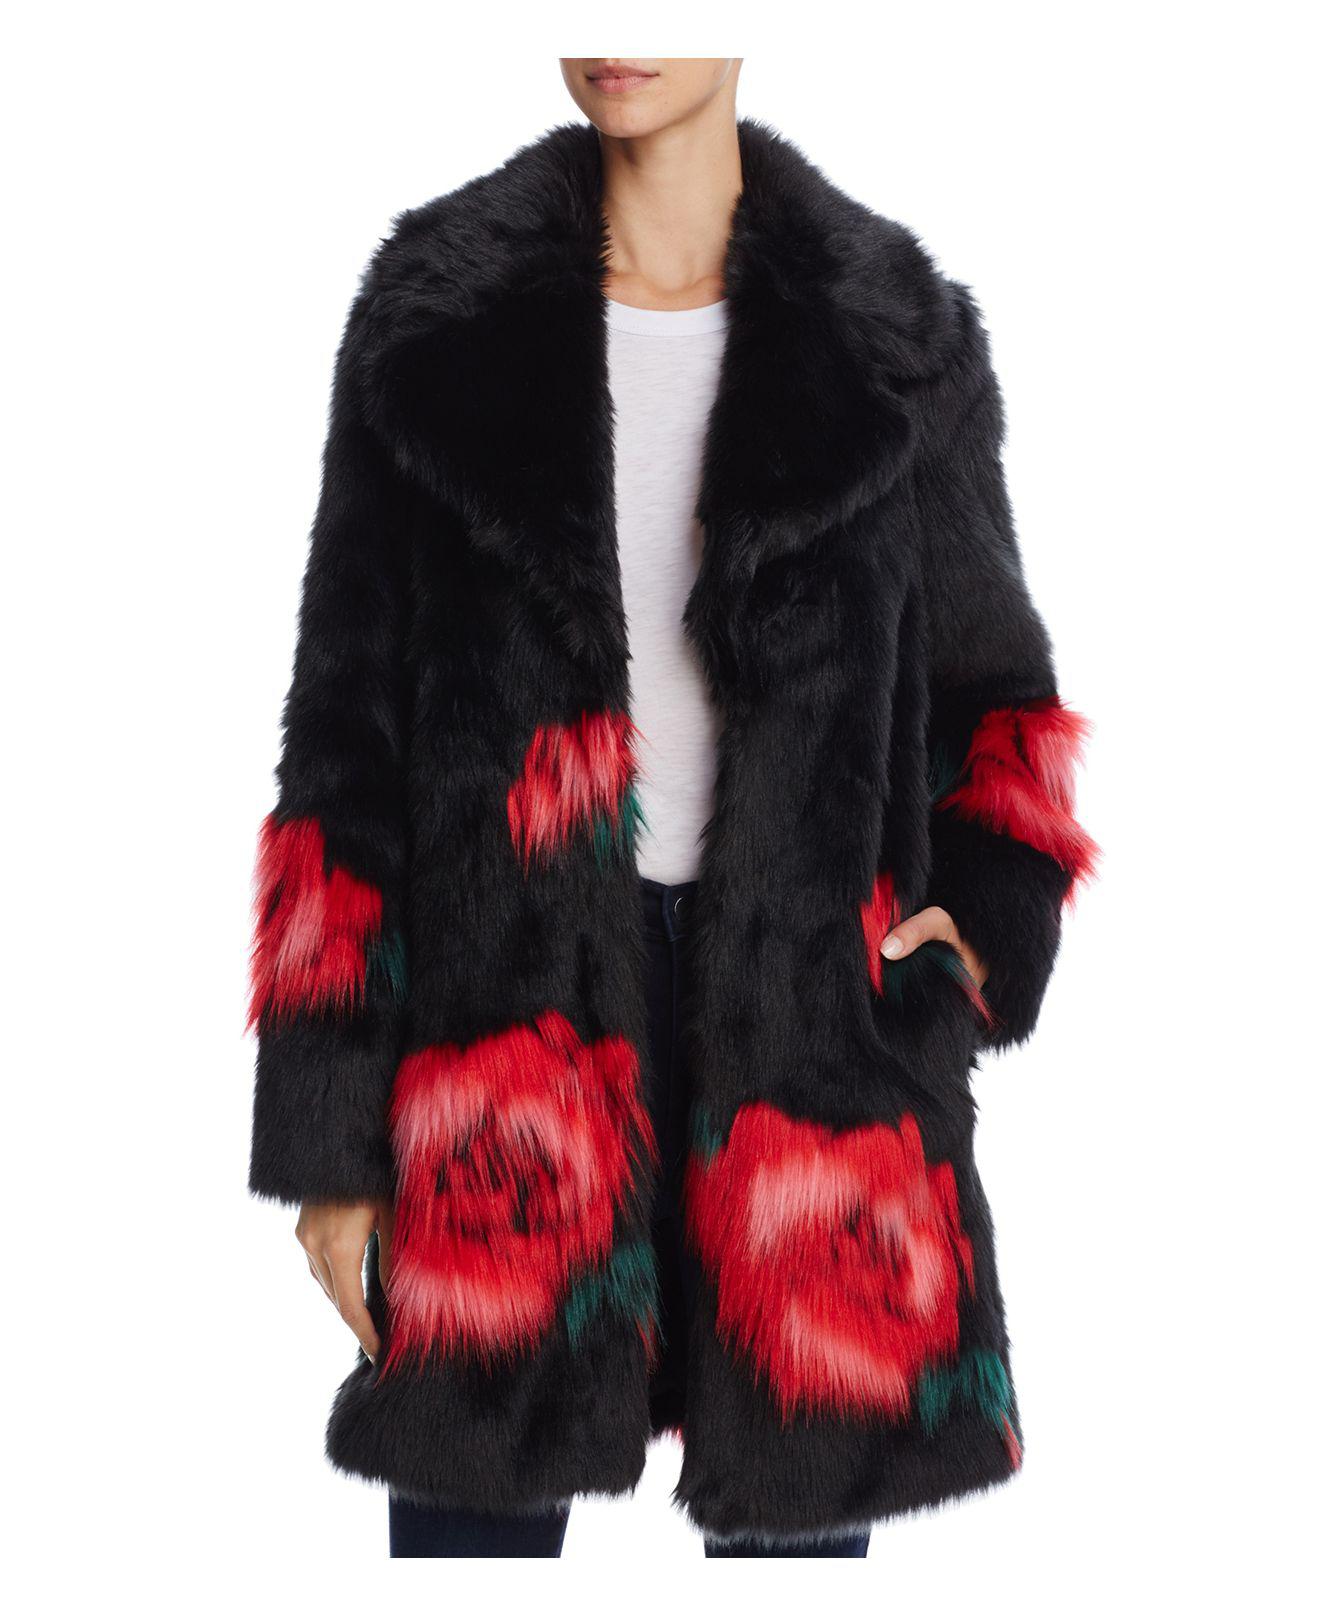 Guess Melanie Floral Print Faux Fur Coat in Red - Lyst